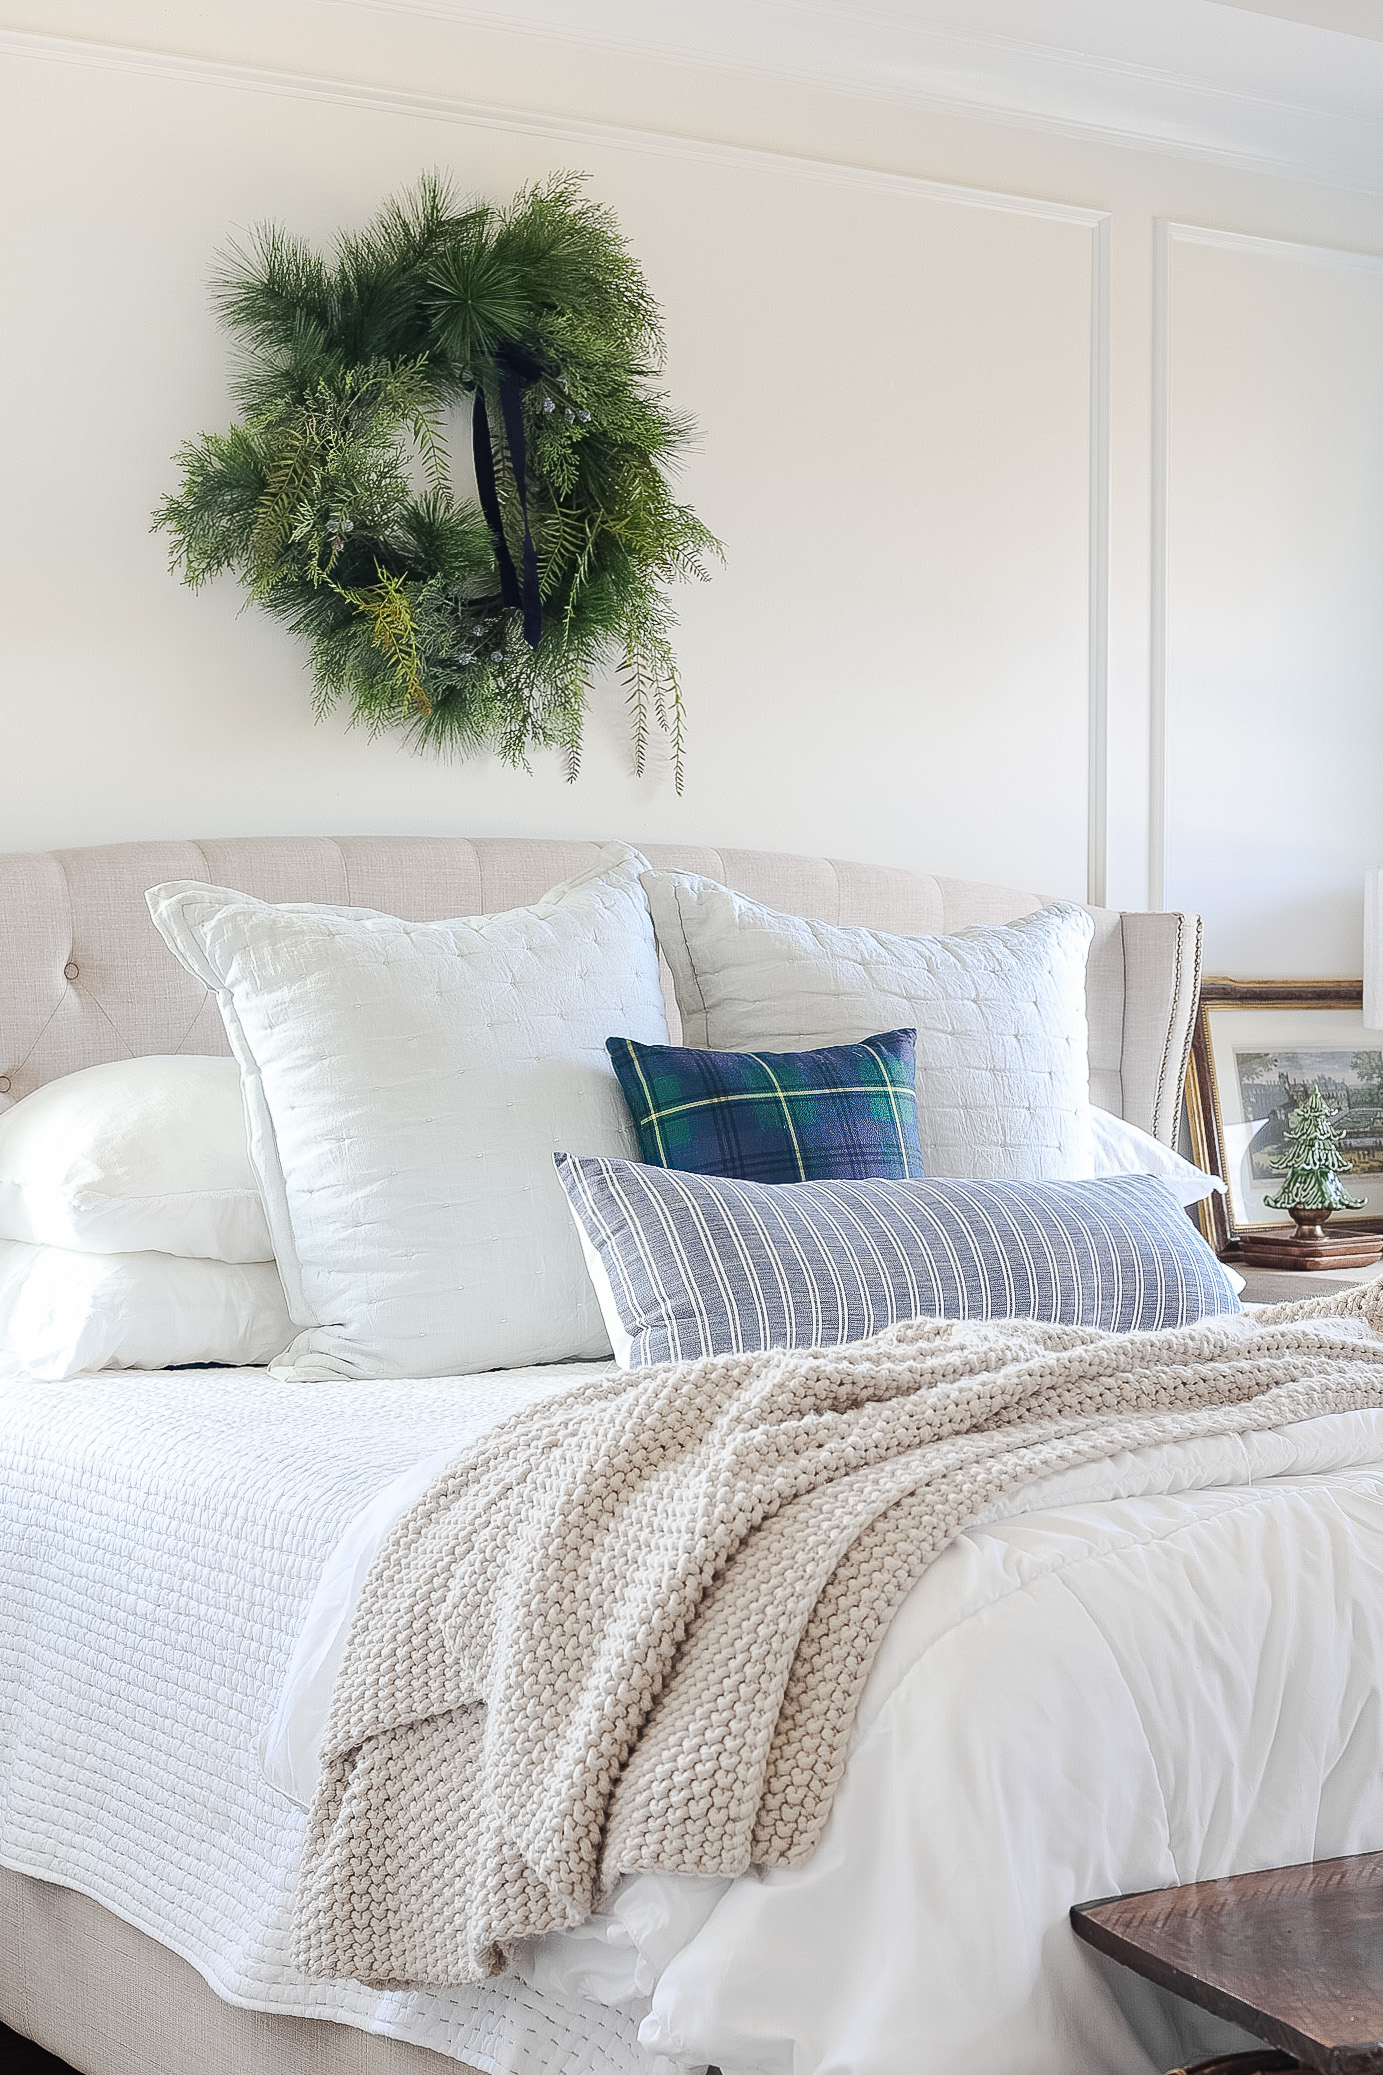 bed with white bedding, blanket, pillows and christmas wreath above bed